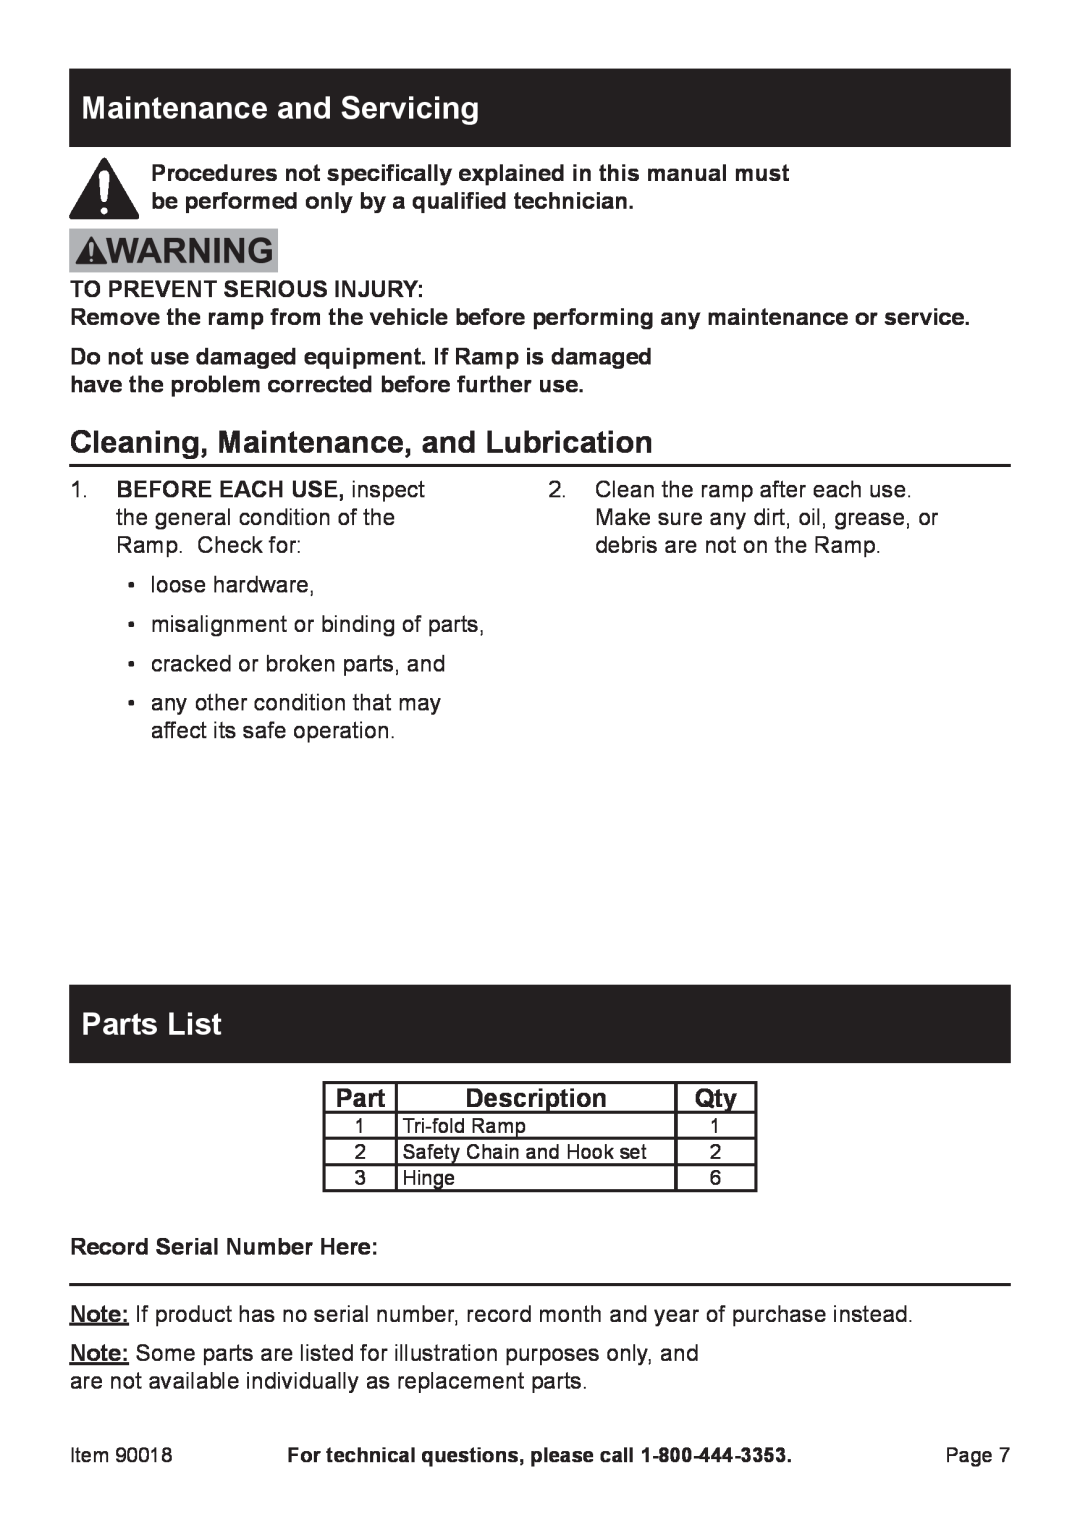 Zweita  Co 90018 manual Maintenance and Servicing, Cleaning, Maintenance, and Lubrication, Parts List, Description 